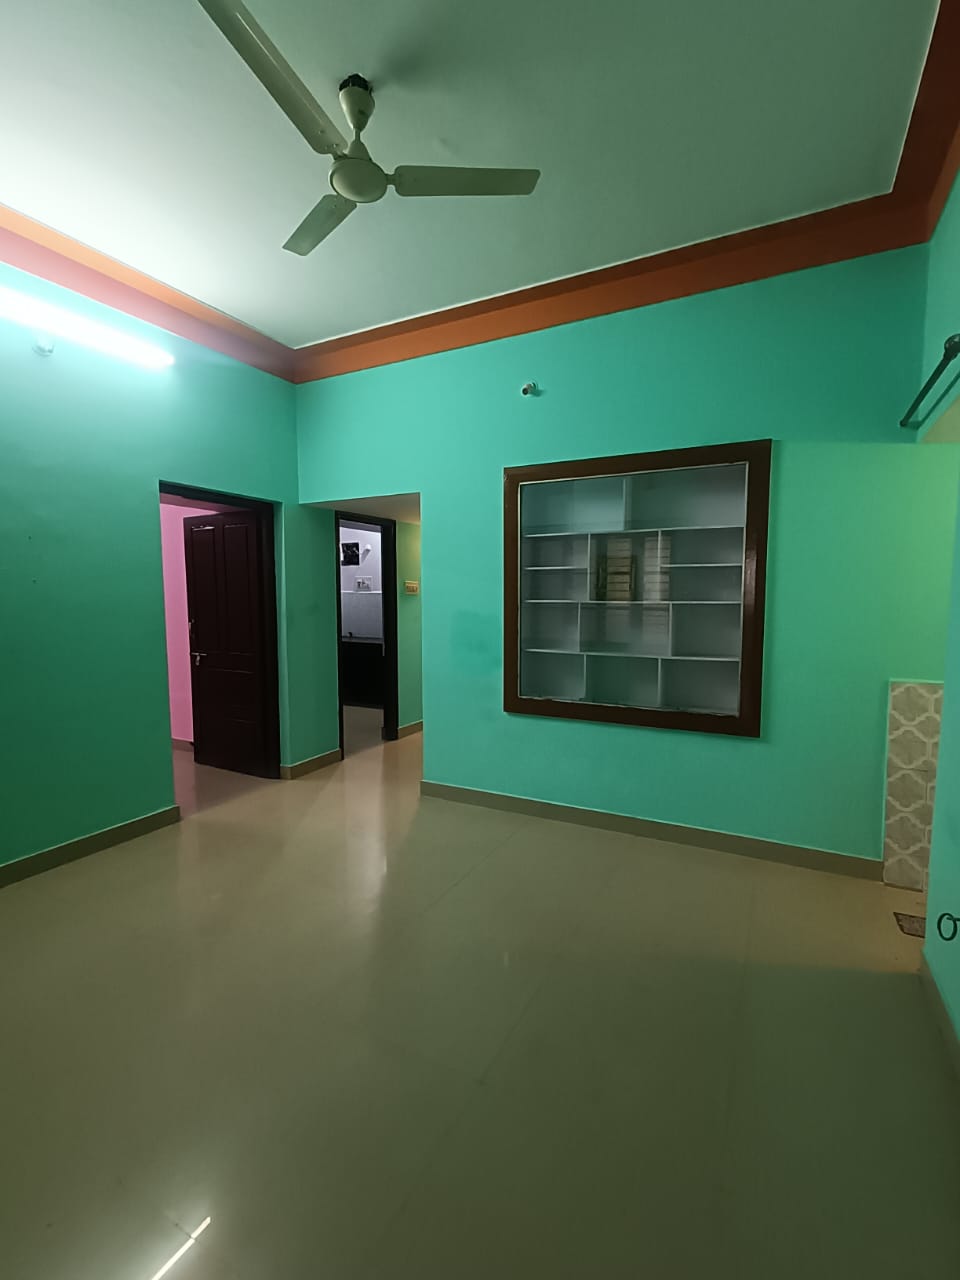 1 BHK Independent House for Lease Only at JAML2 - 5155-15lakh in NGEF Layout